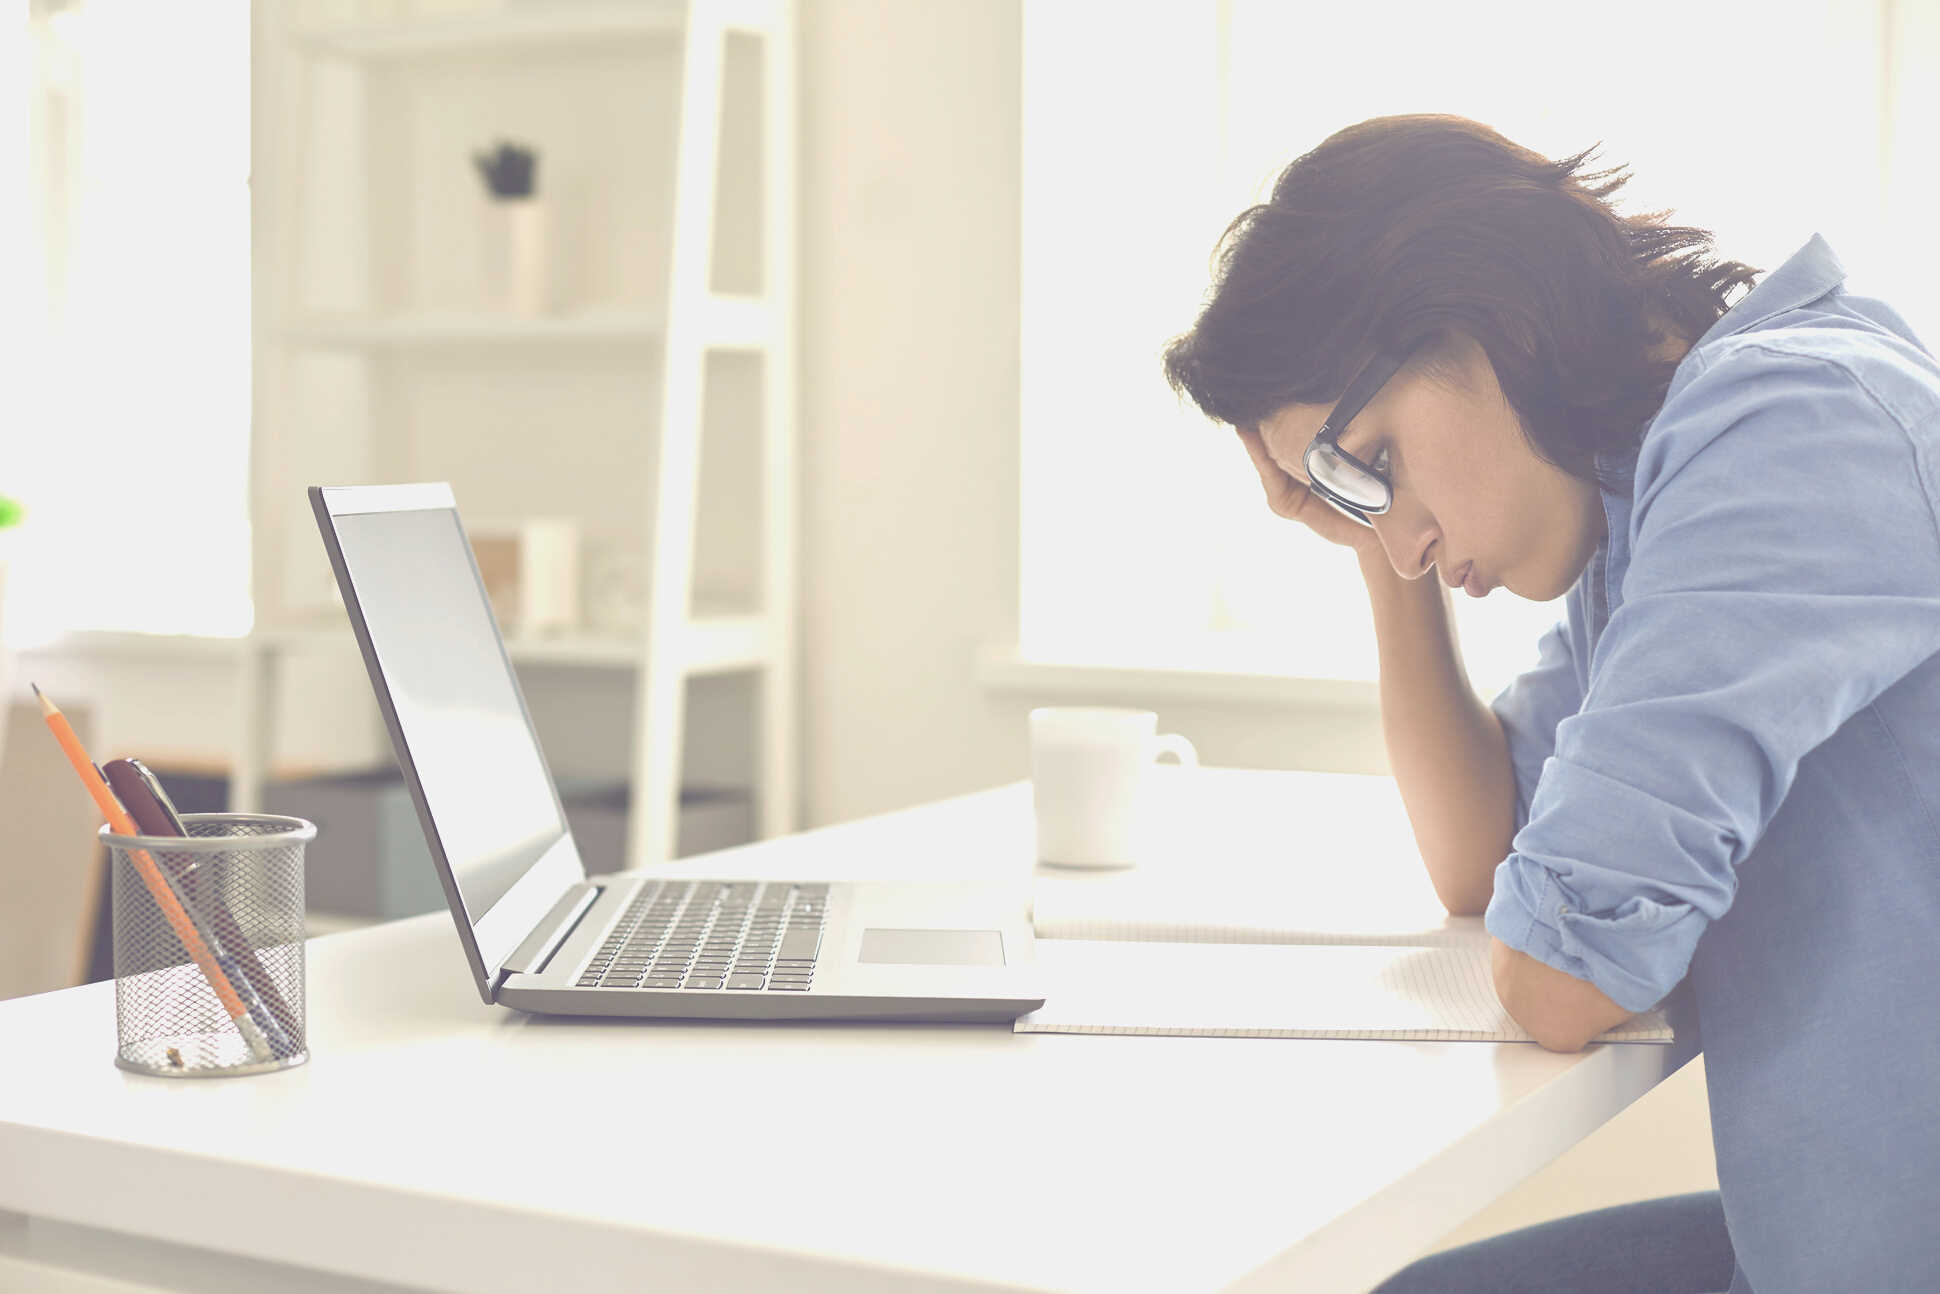 Exhausted Young Woman Working on Difficult Task in Front of Laptop at Home Office. Freelancer Feeling Tired at Workplace